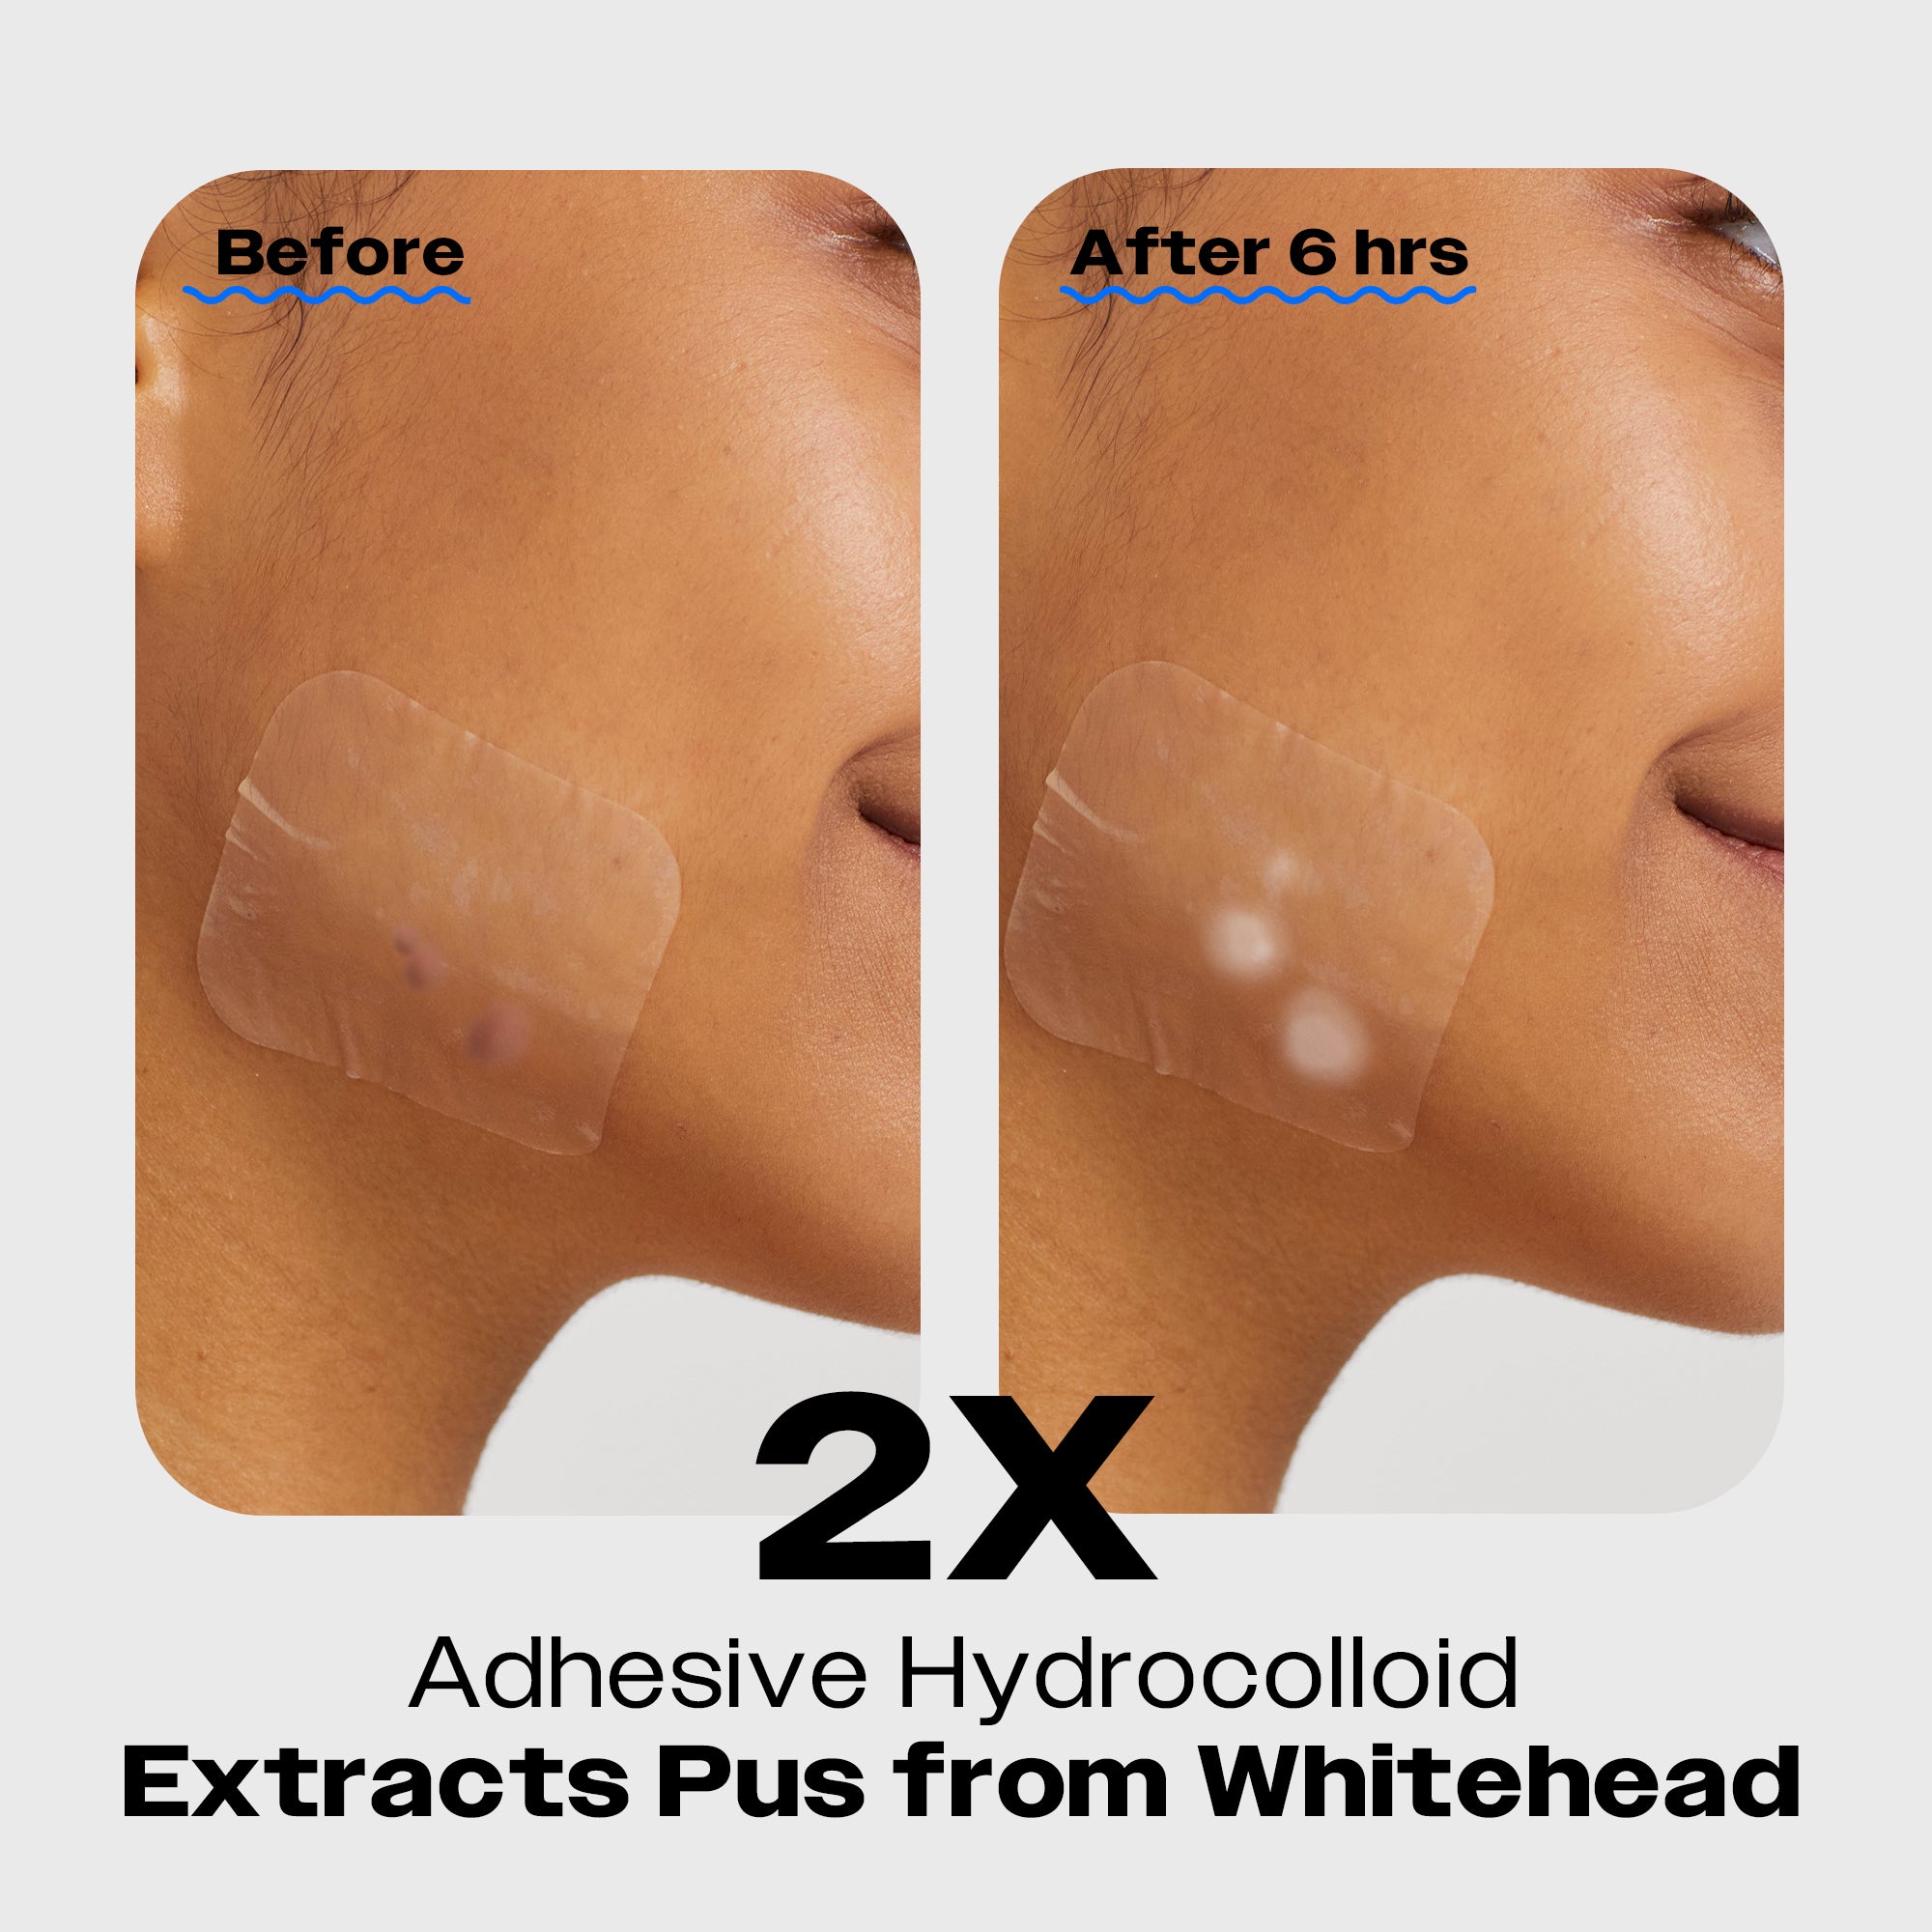 Before and after comparison of skin with a whitehead, showing the effectiveness of an Avarelle ZitOut X-Large Acne Patch over a 6-hour period. Where the after patch has white spots where the pimples used to be.